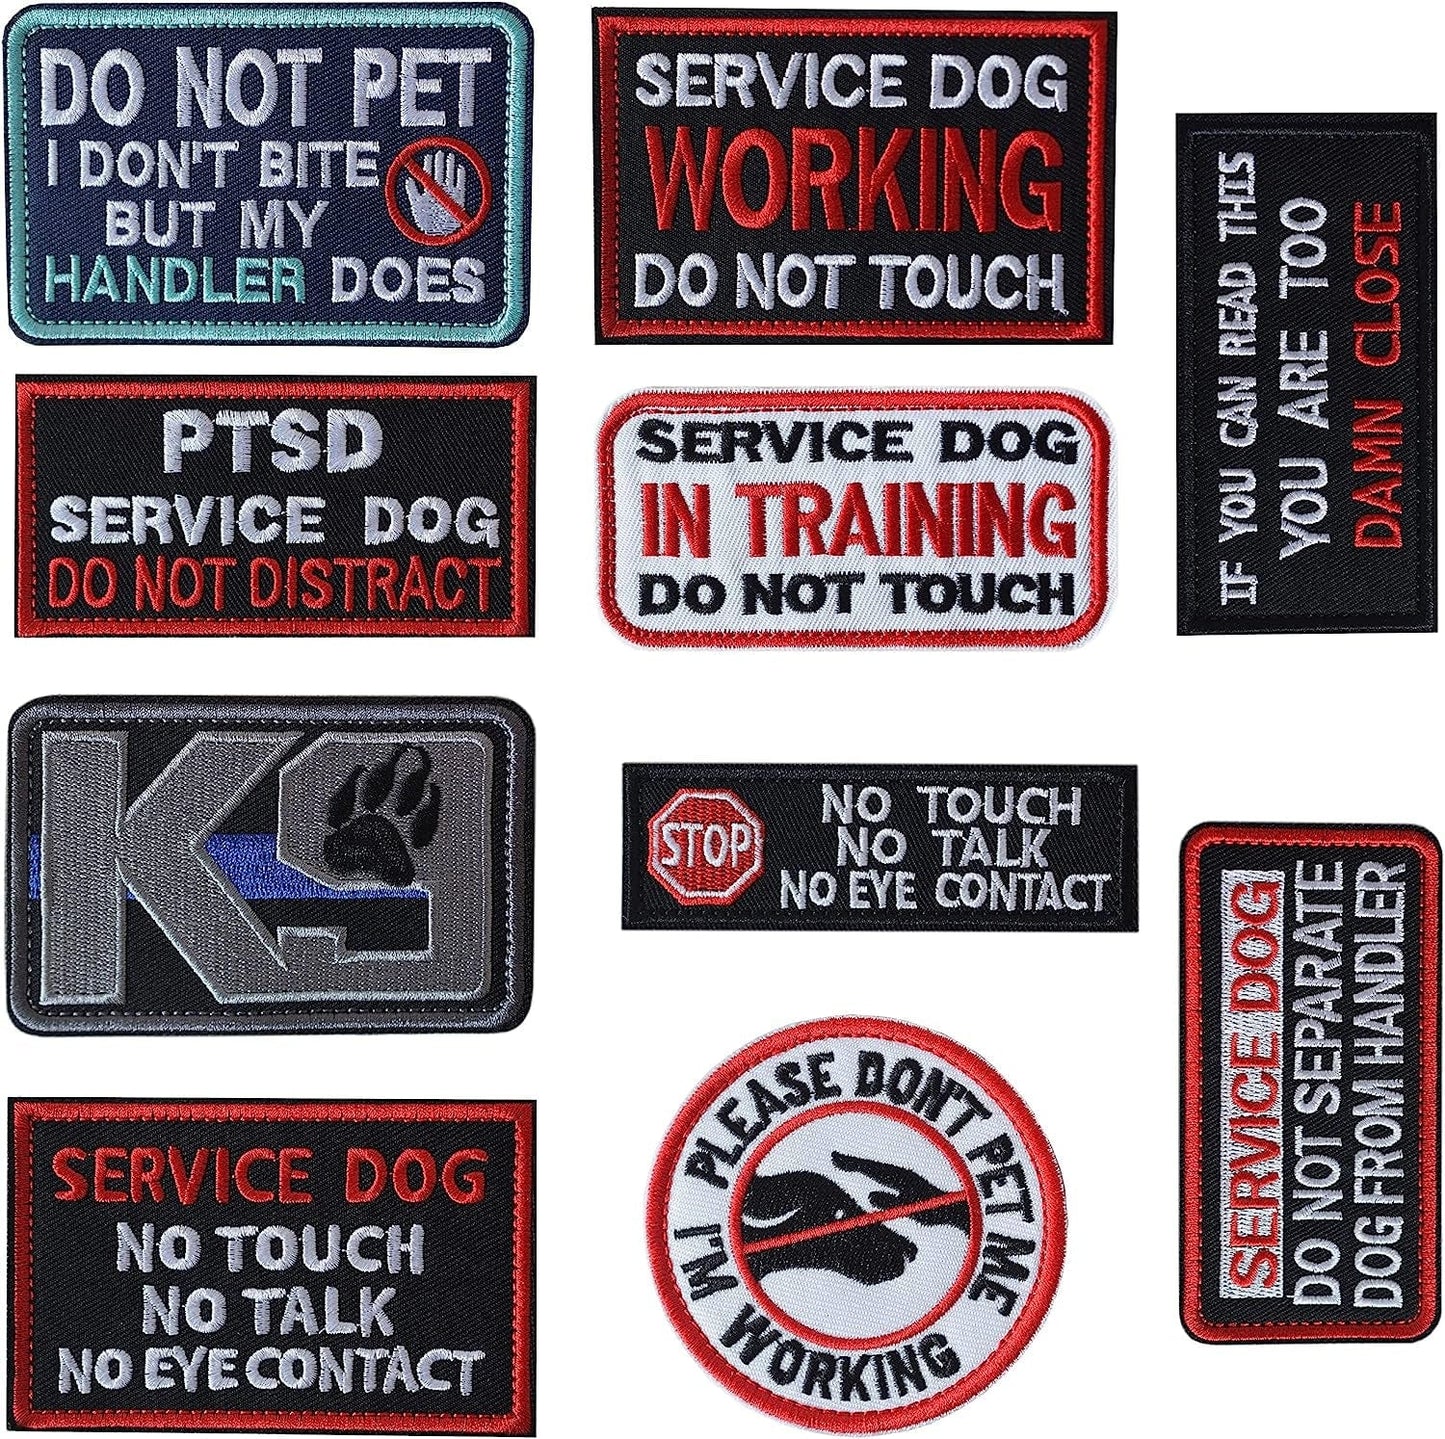 10 Pieces Service Dog Patches Ask to Do Not Pet Patch Vest Removable  Tactical Pe